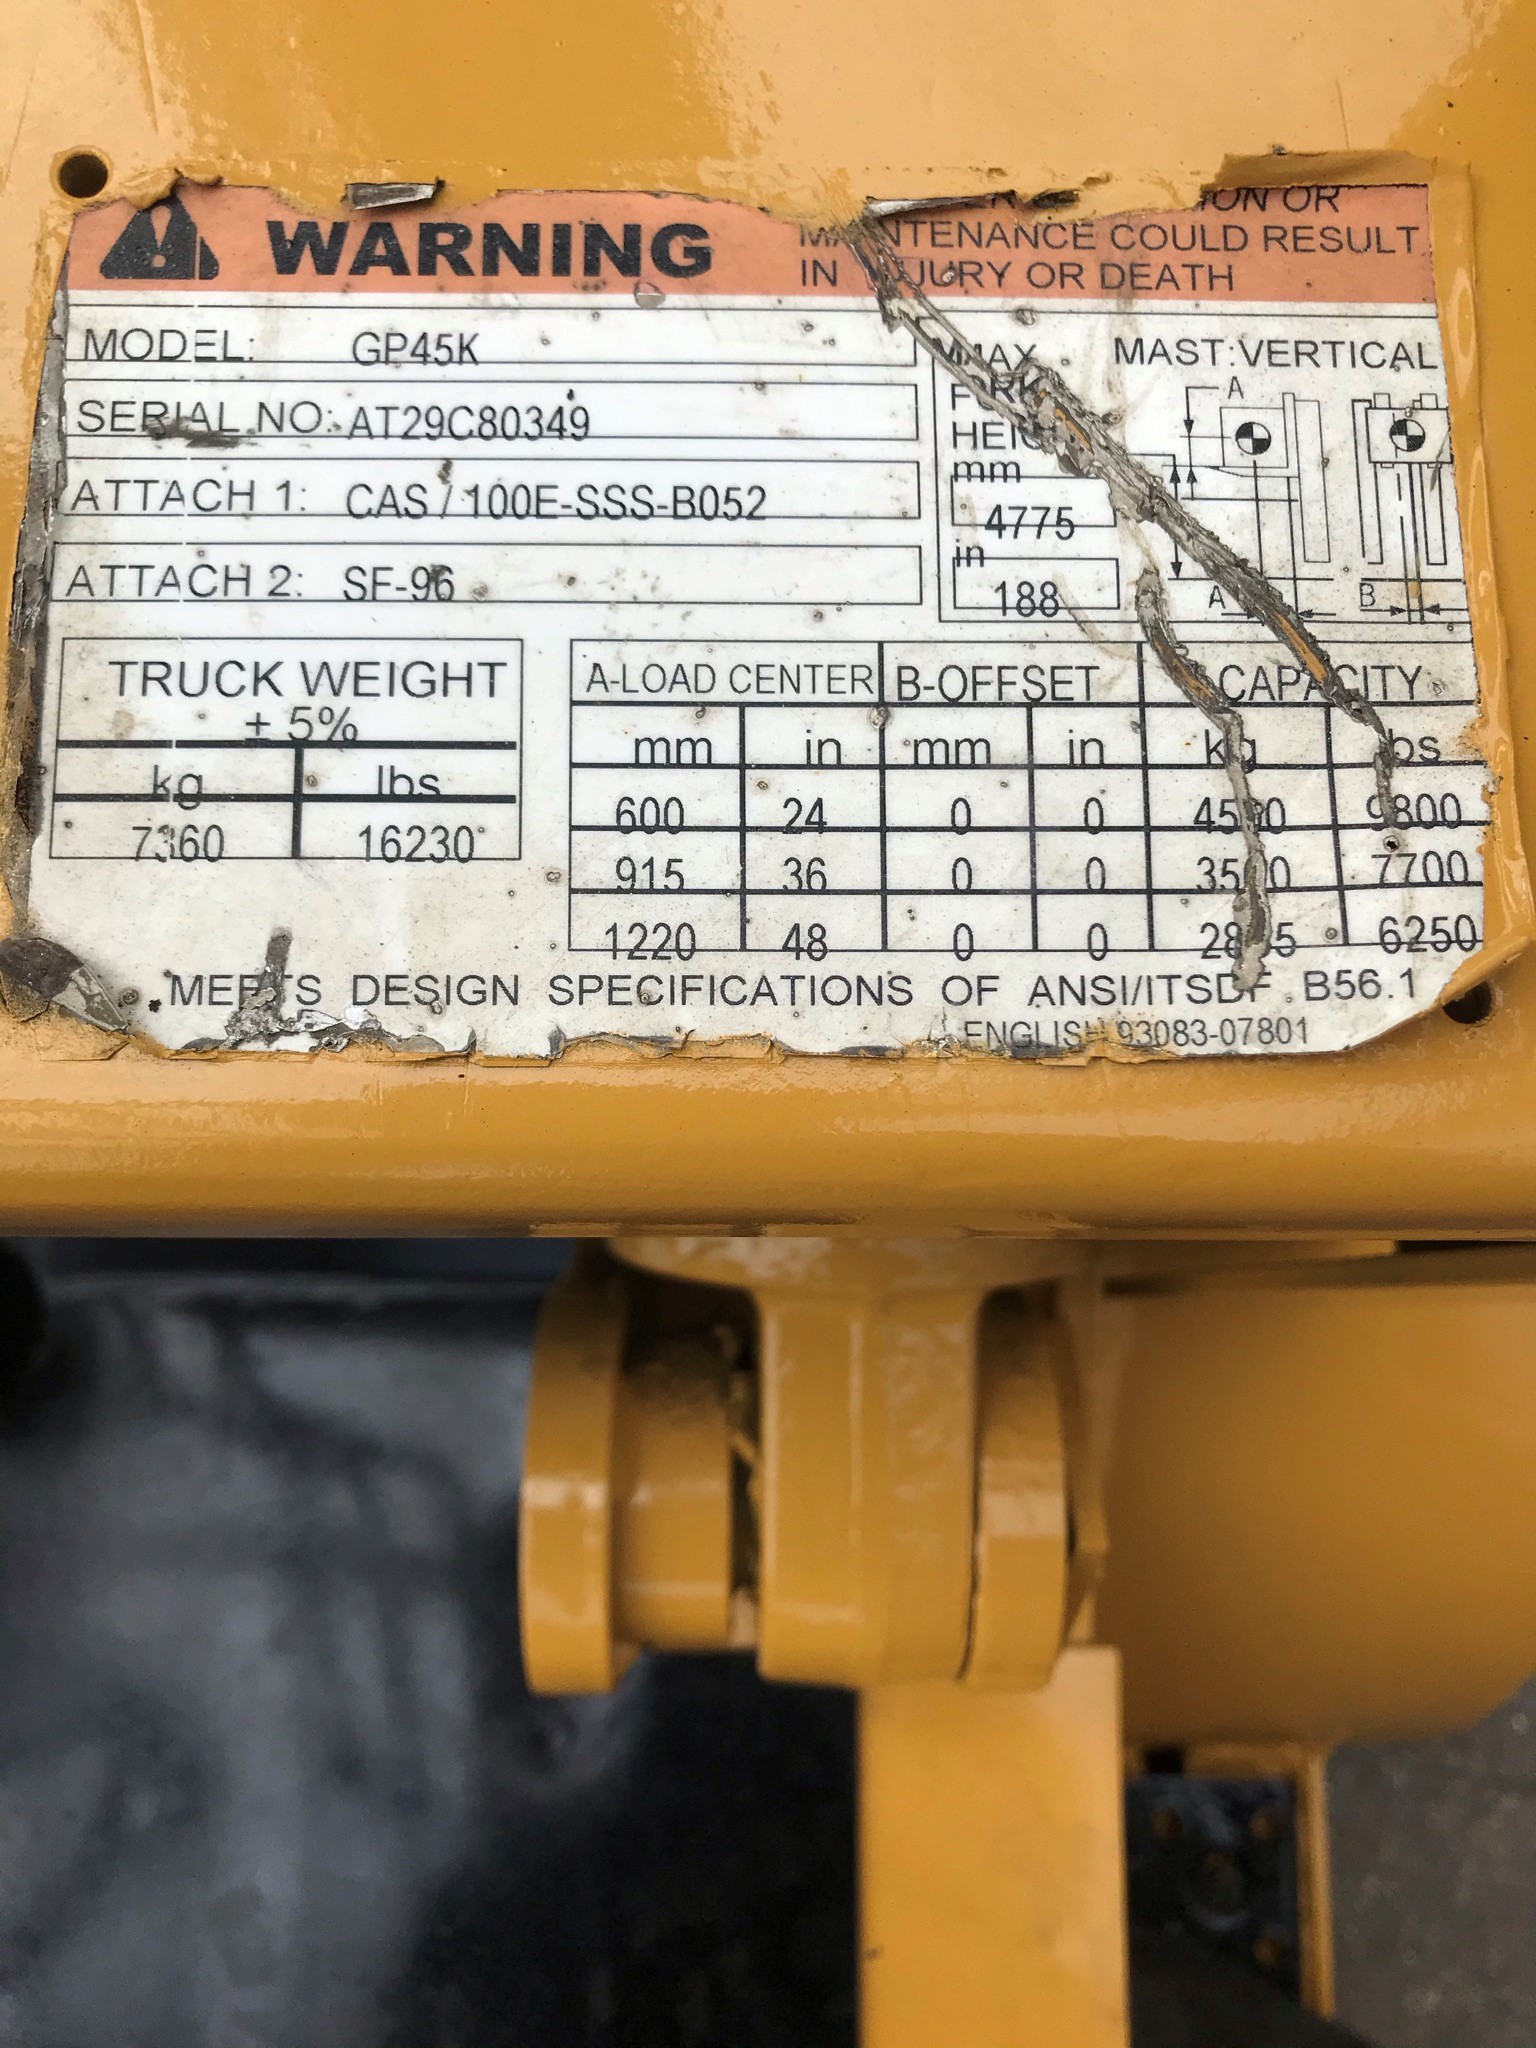 Model GP45K yellow caterpillar forklift with serial number AT29C80349 for sale